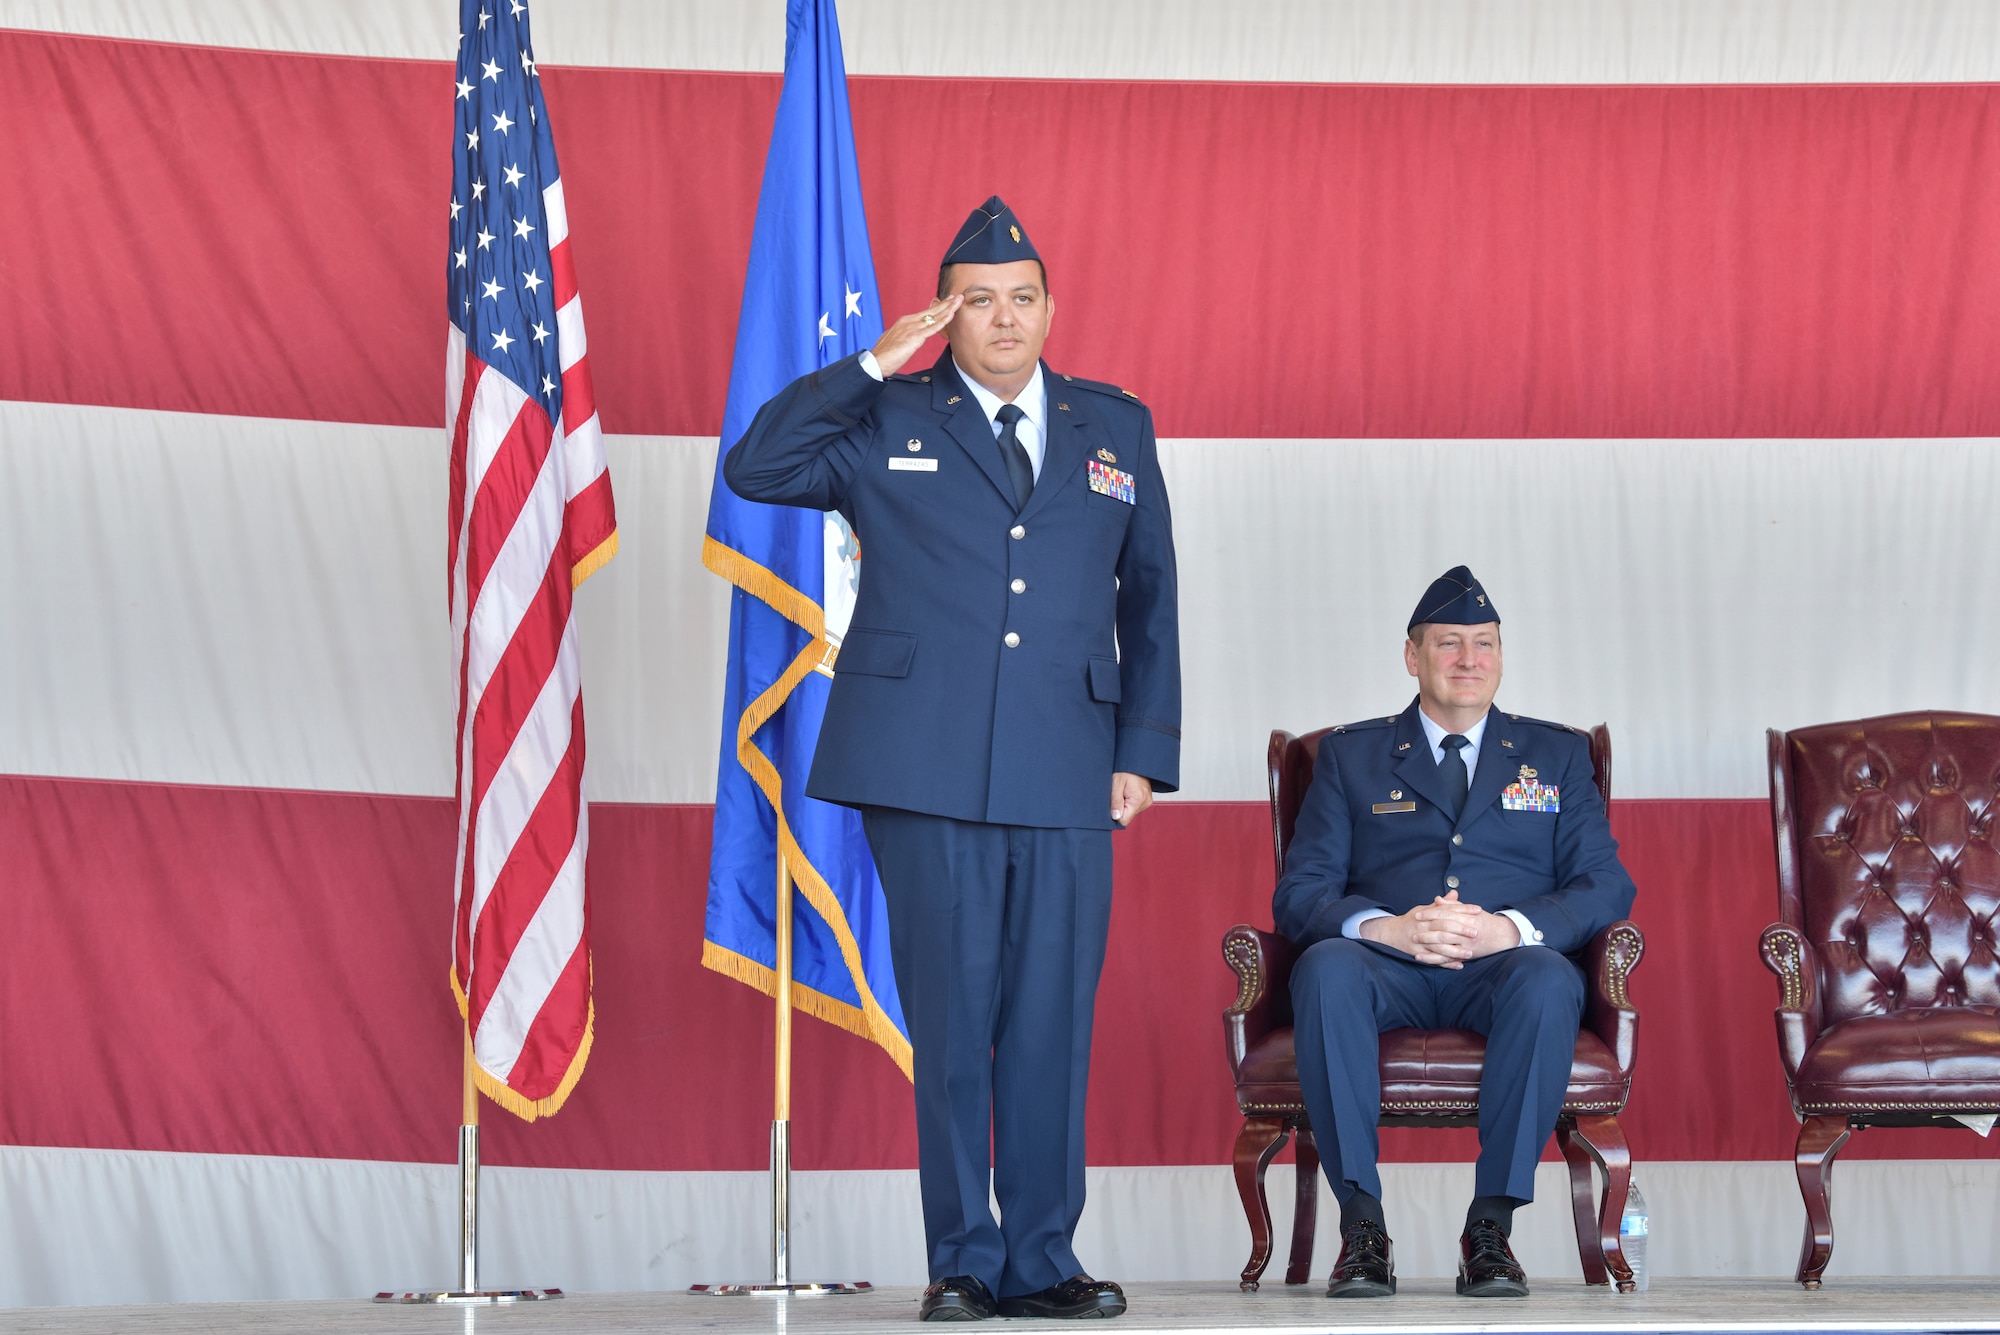 944th AMXS receives new commander